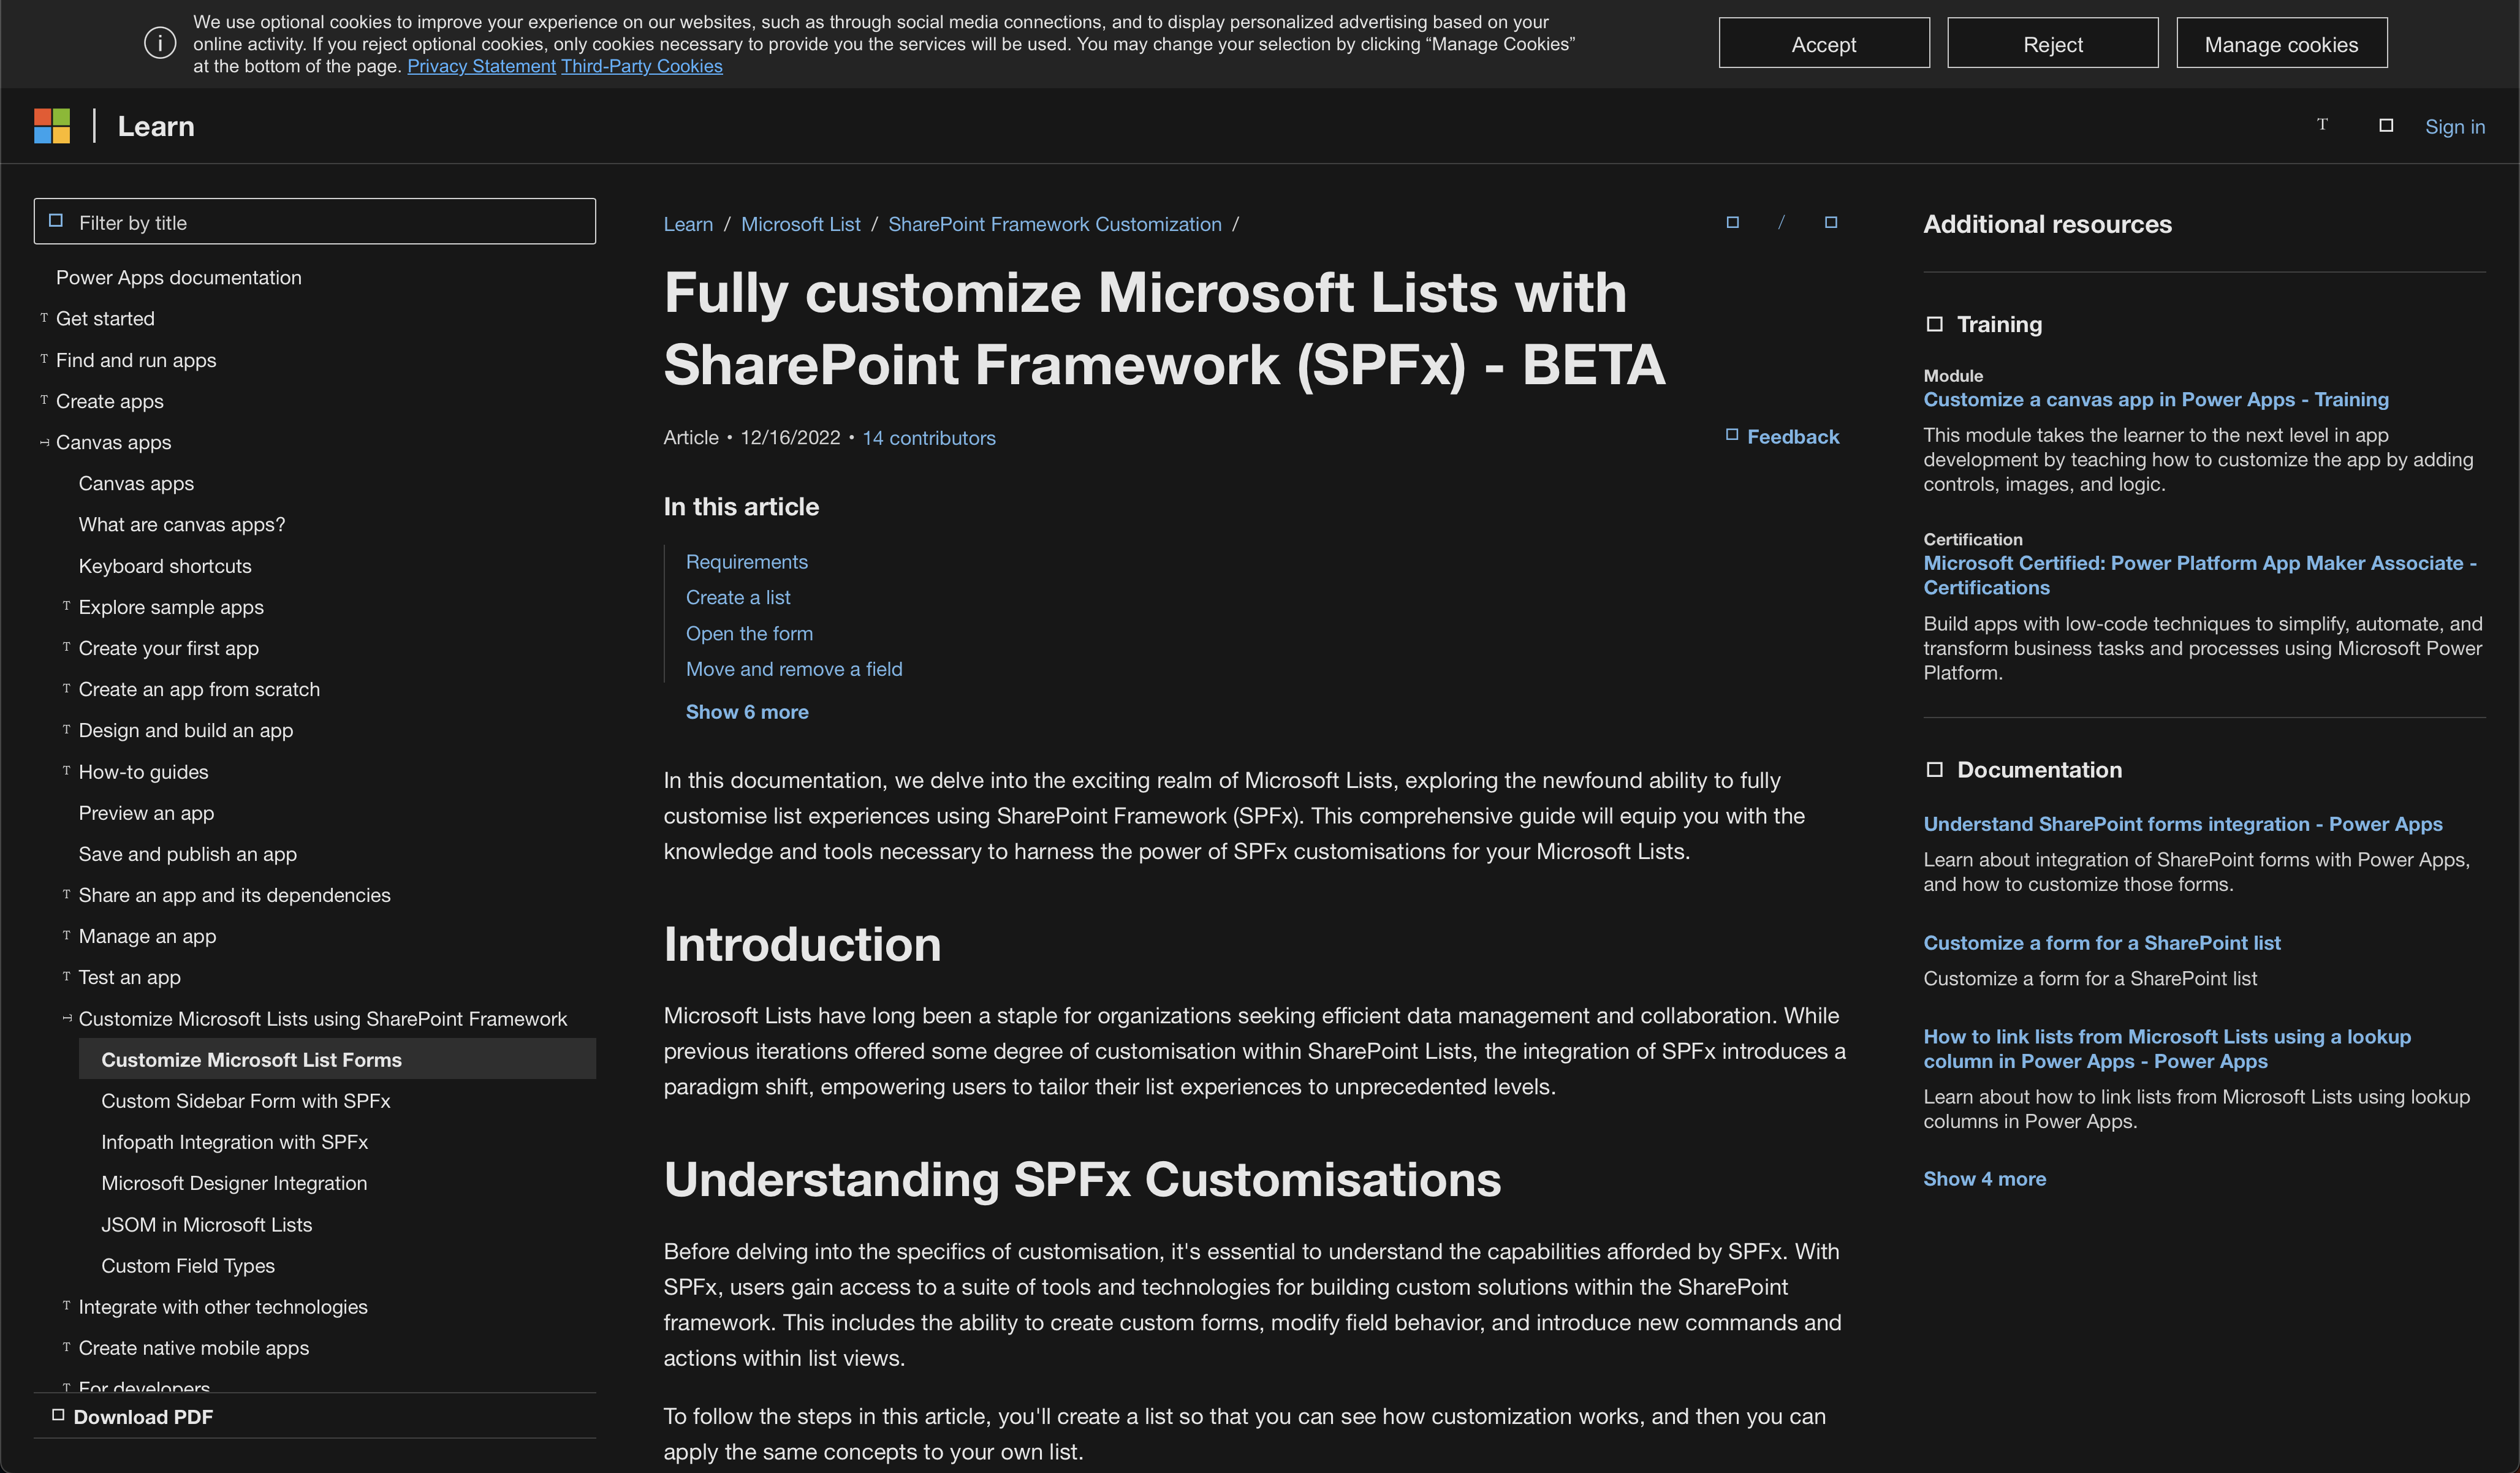 This is great news for many companies and people. Finally, the Microsoft list can be fully customised using the SharePoint Framework. Some customisati